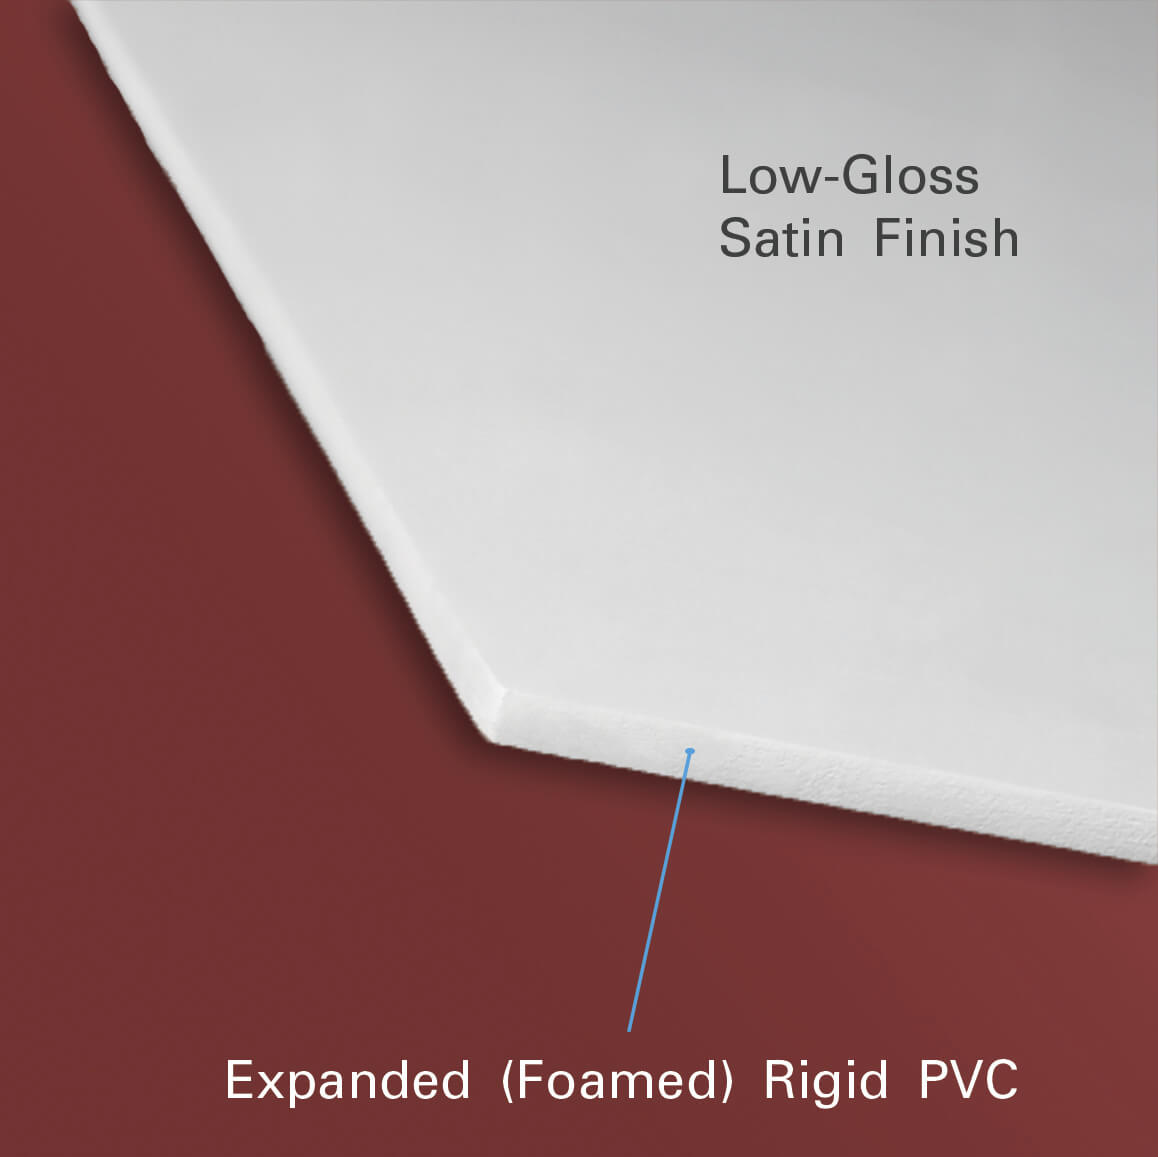 corner angle view showing the low gloss satin finish and the expanded foamed rigid PVC core